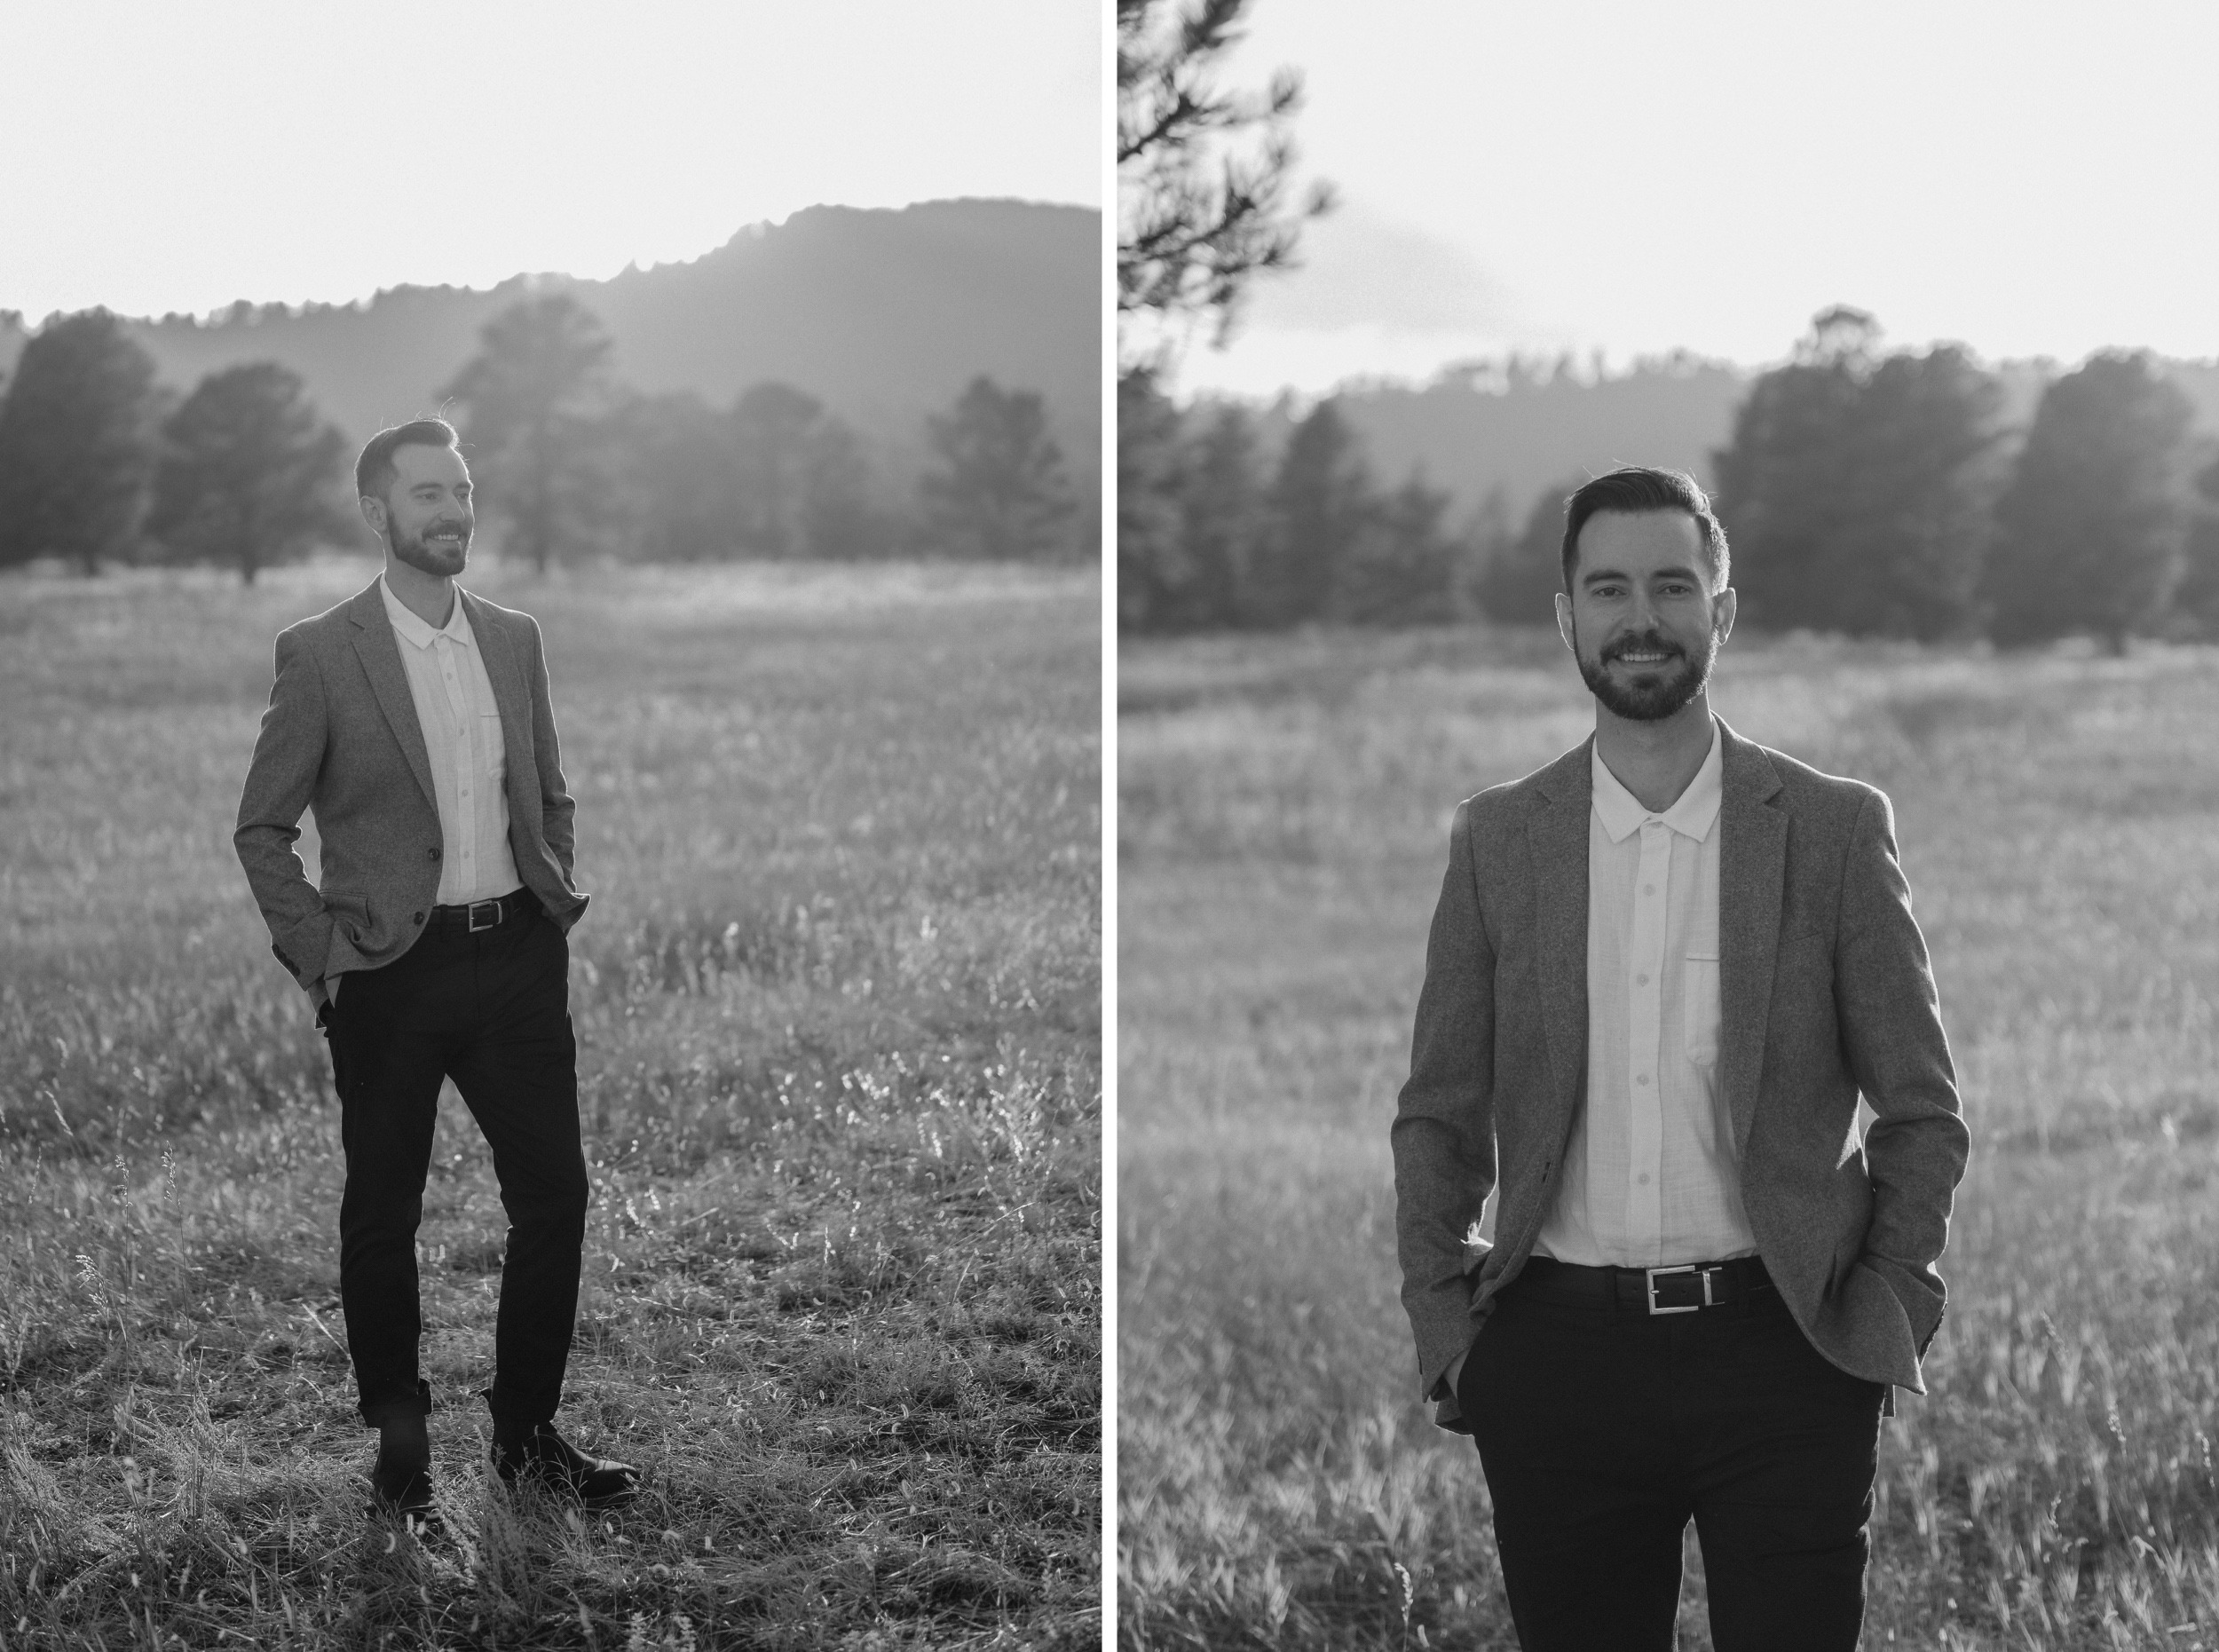 Anti-bride inspired intimate elopement on a fall evening in Evergreen, Colorado. The couple danced in the grass fields together with their newborn baby for their intimate elopement. Photos by Durango wedding photographer, Ashley Joyce Photography.